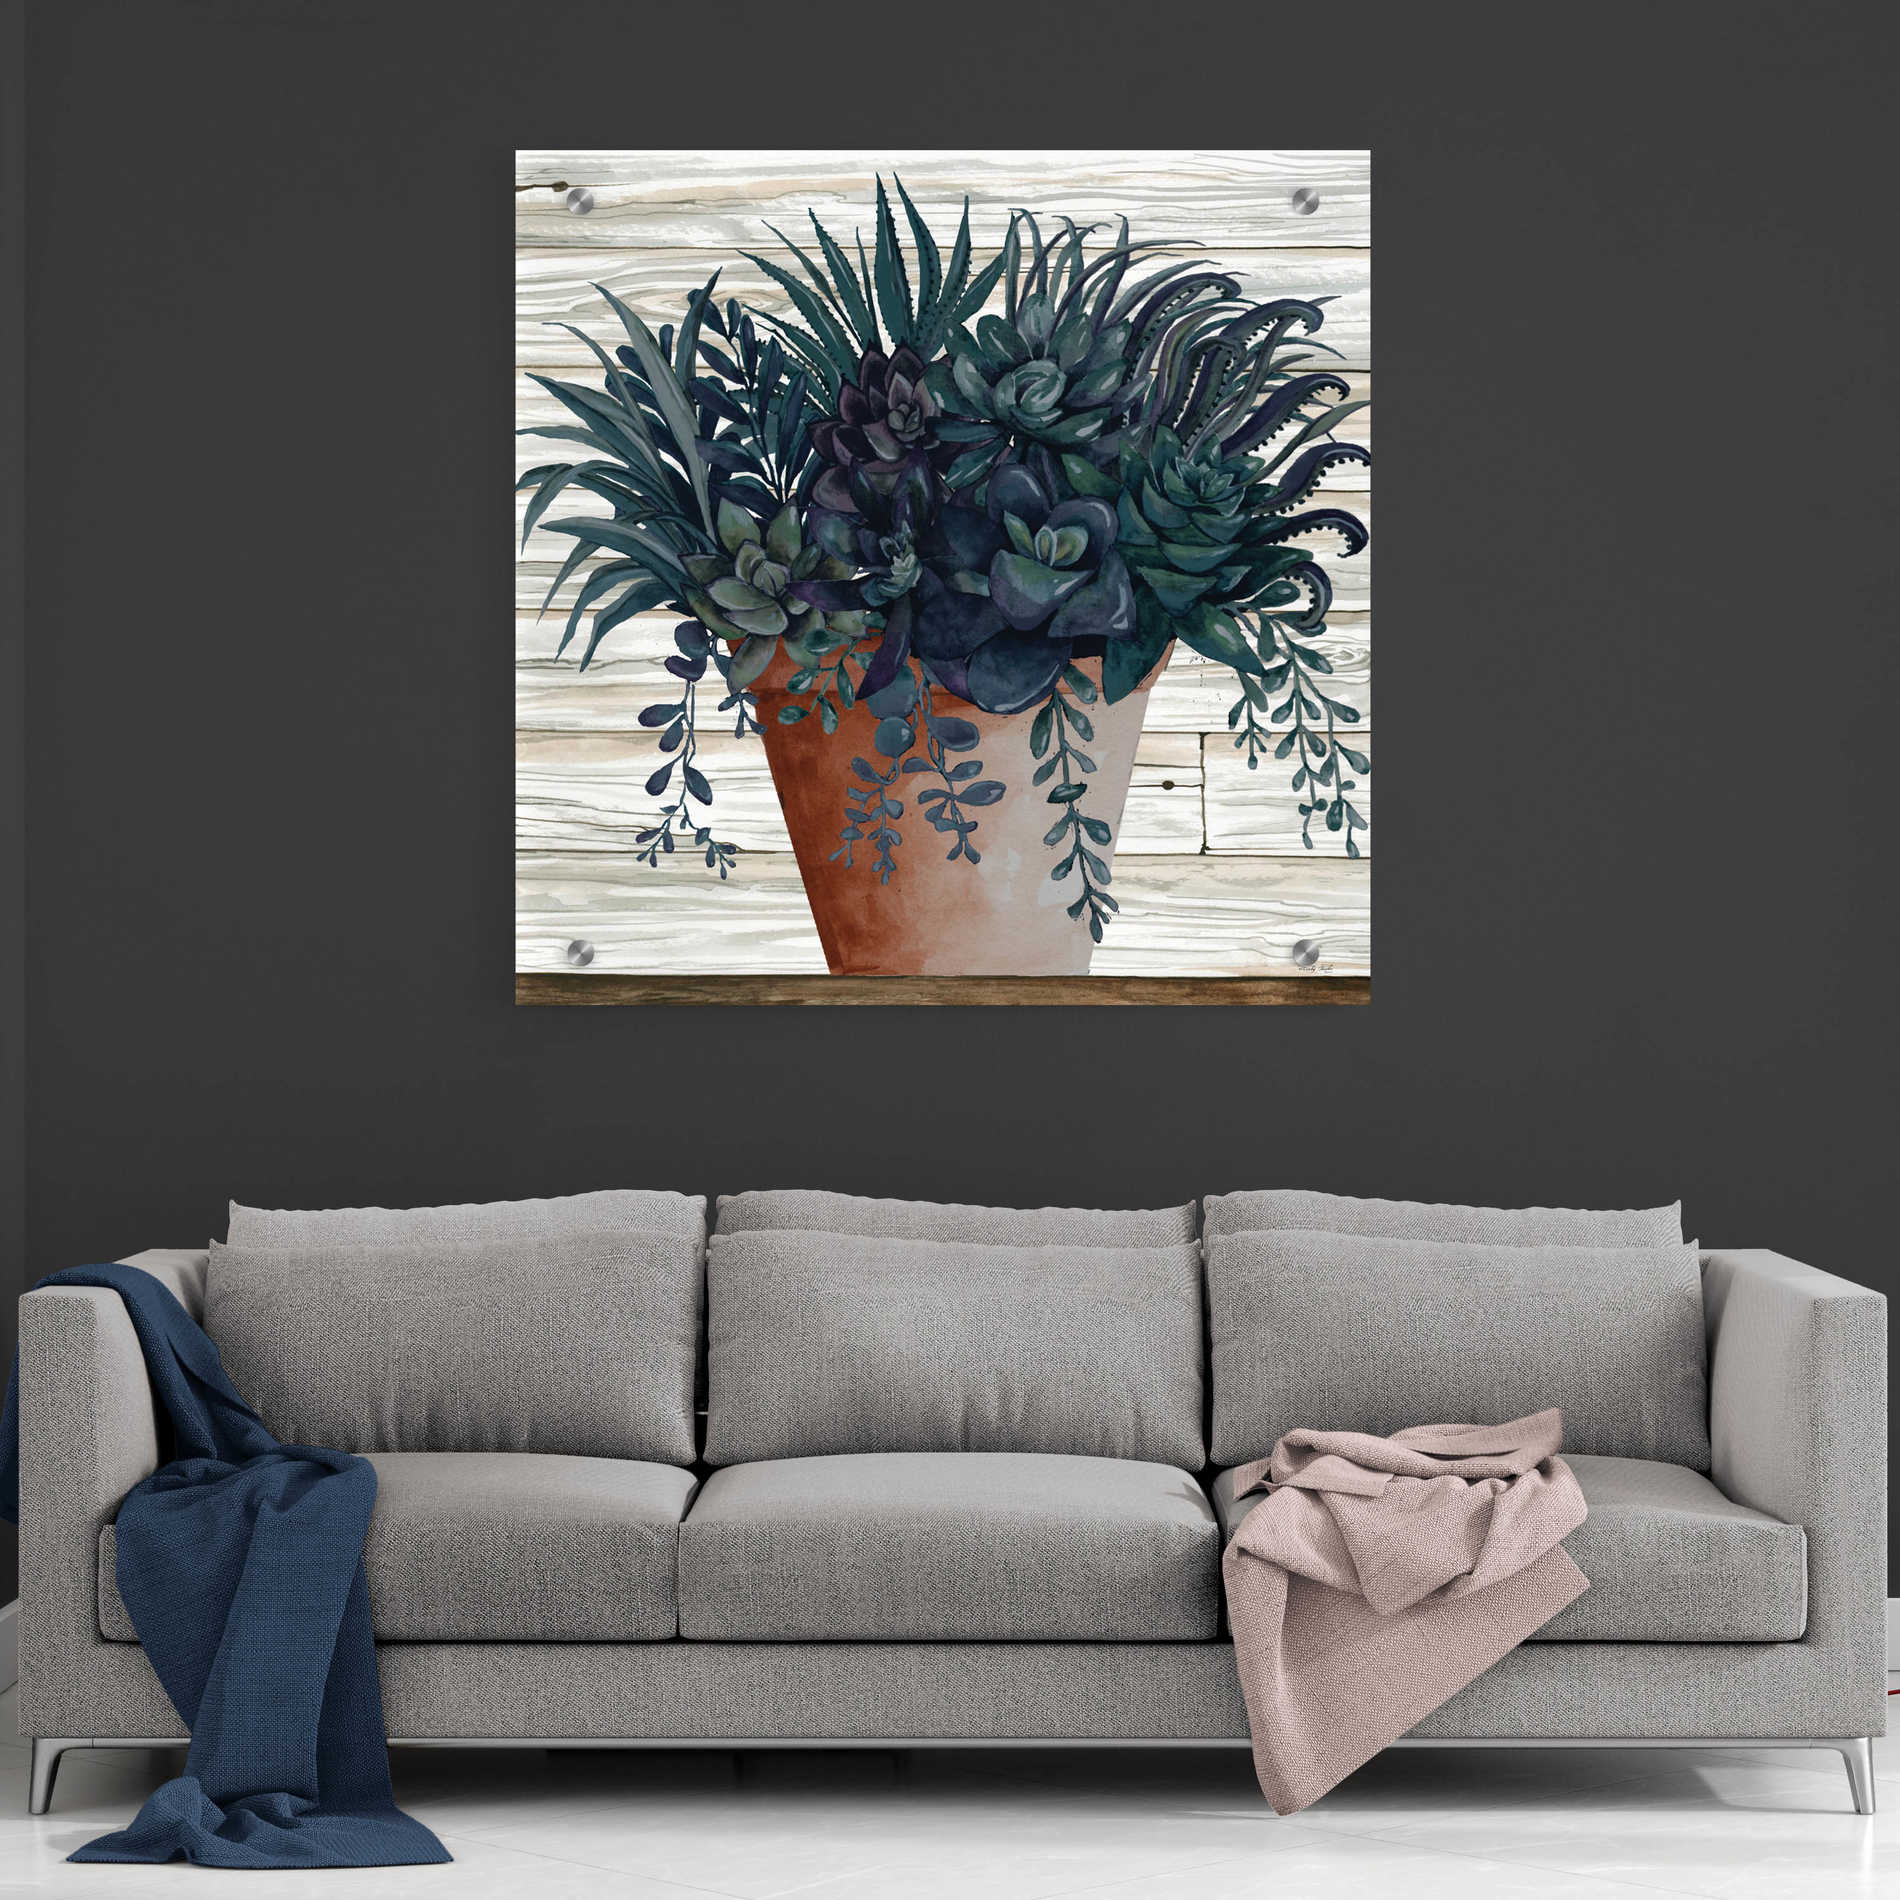 Epic Art 'Remarkable Succulents I' by Cindy Jacobs, Acrylic Glass Wall Art,36x36